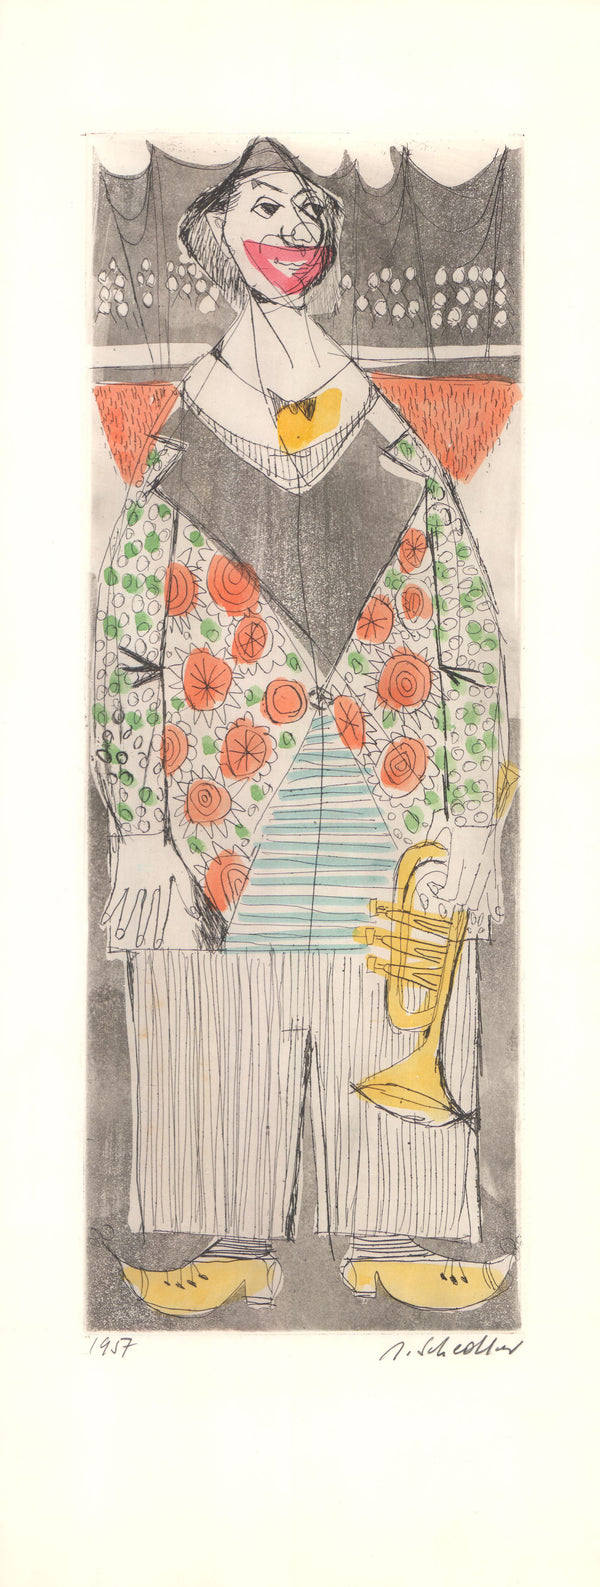 Clown II, 1957 by Jacques Schedler - 10 X 25 Inches (Original Etching, Numbered & Signed)